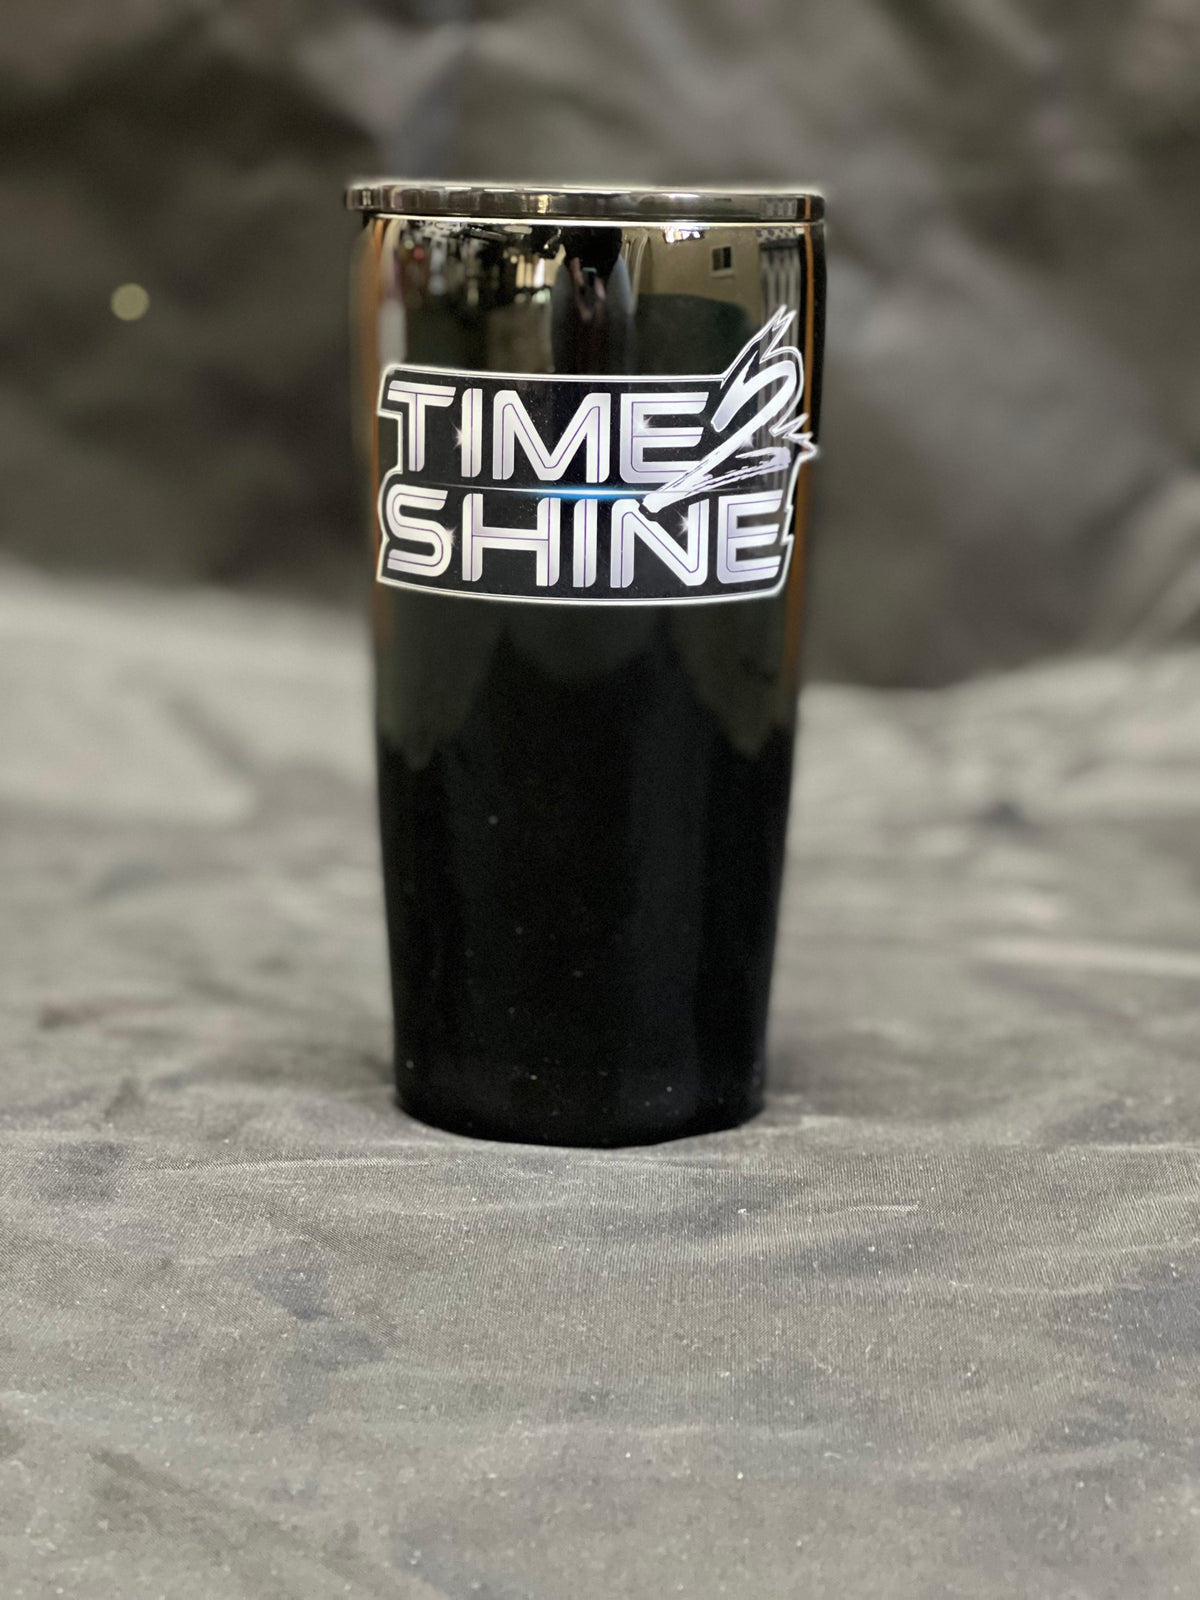 Time 2 Shine Products and Apparel (@time2shineproducts) • Instagram photos  and videos